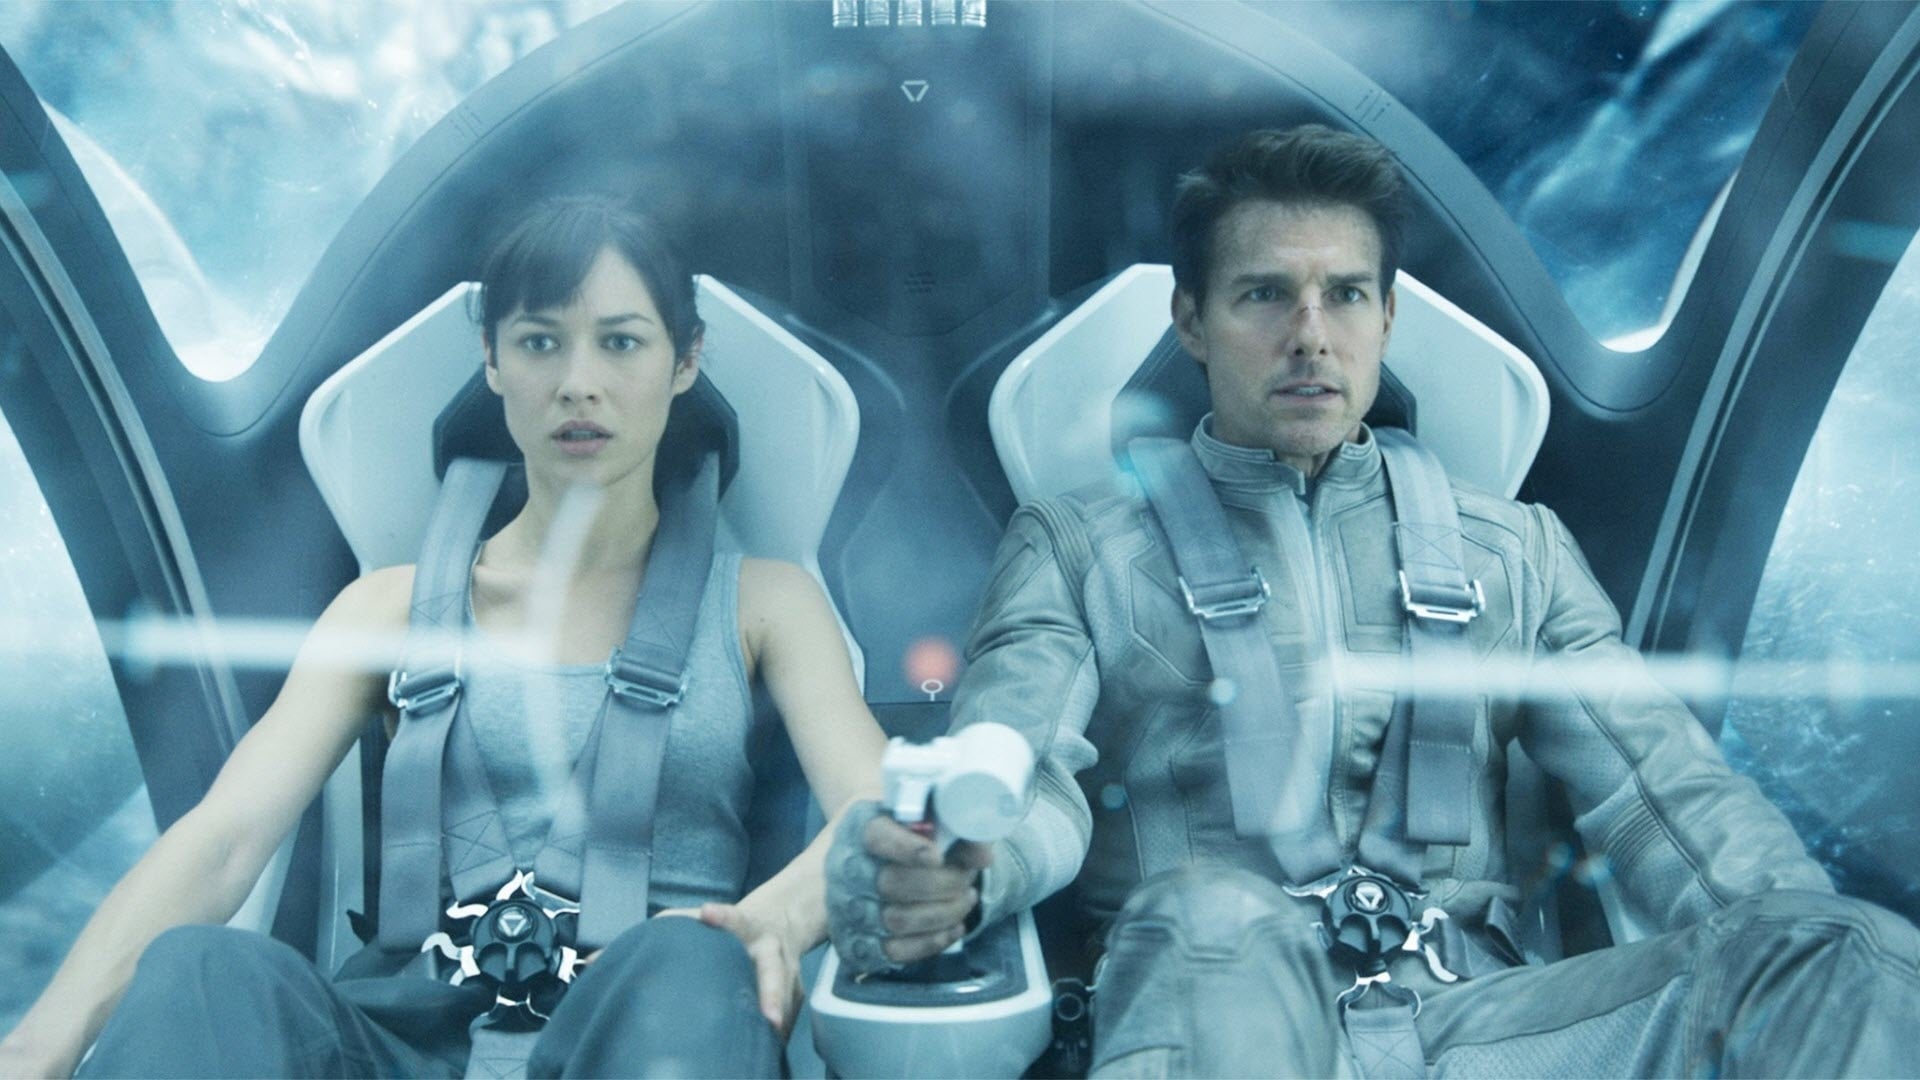 Sci-Fi Action Adventure Dystopian Space Tom Cruise